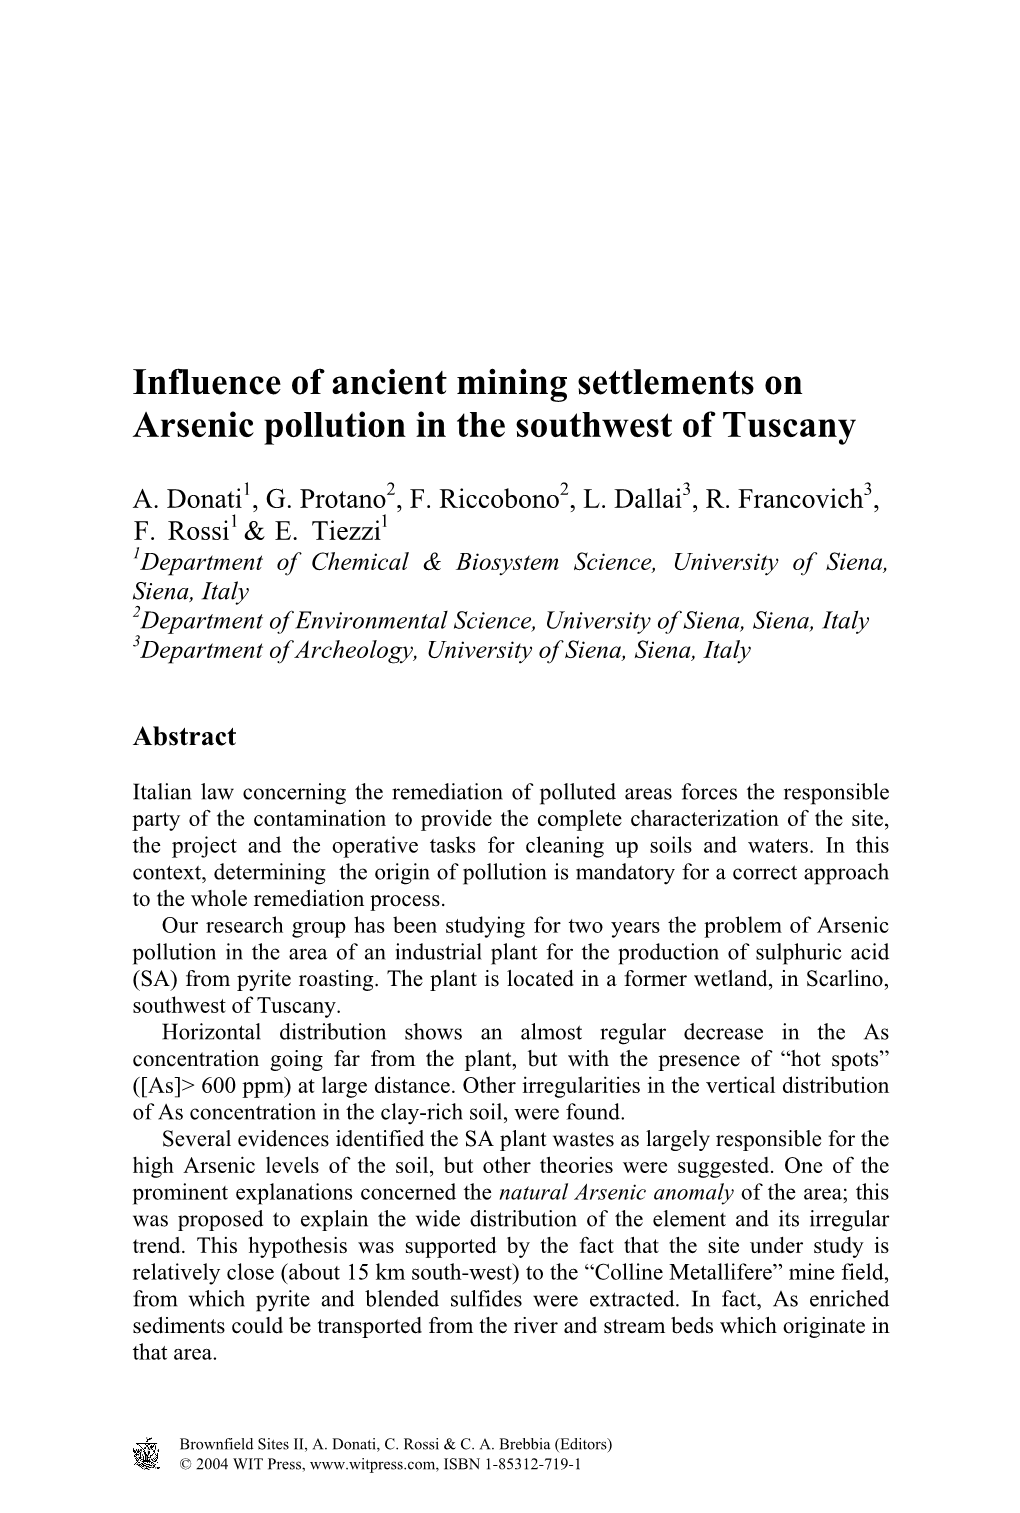 Influence of Ancient Mining Settlements on Arsenic Pollution in the Southwest of Tuscany